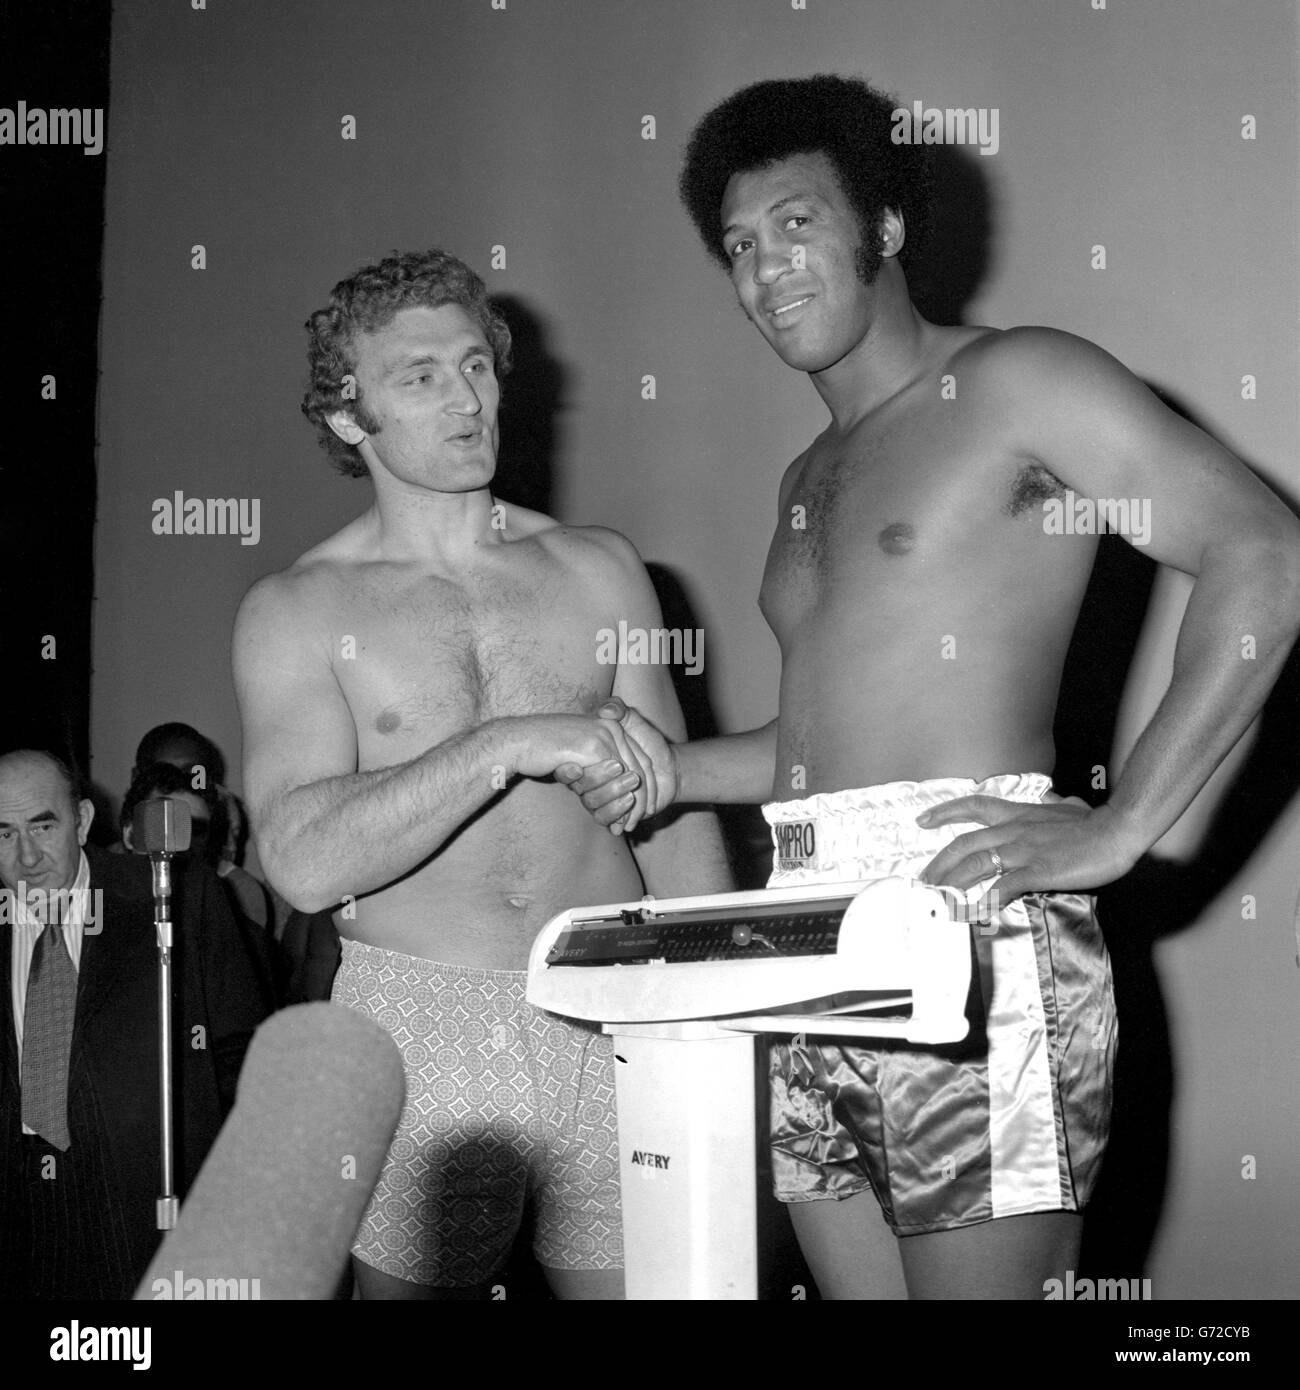 Great Britain's Joe Bugner (l) and American Jimmy Ellis during the weigh-in at the Dominion. Bugner and Ellis will meet each other in the ring at Wembley later in the evening. Stock Photo